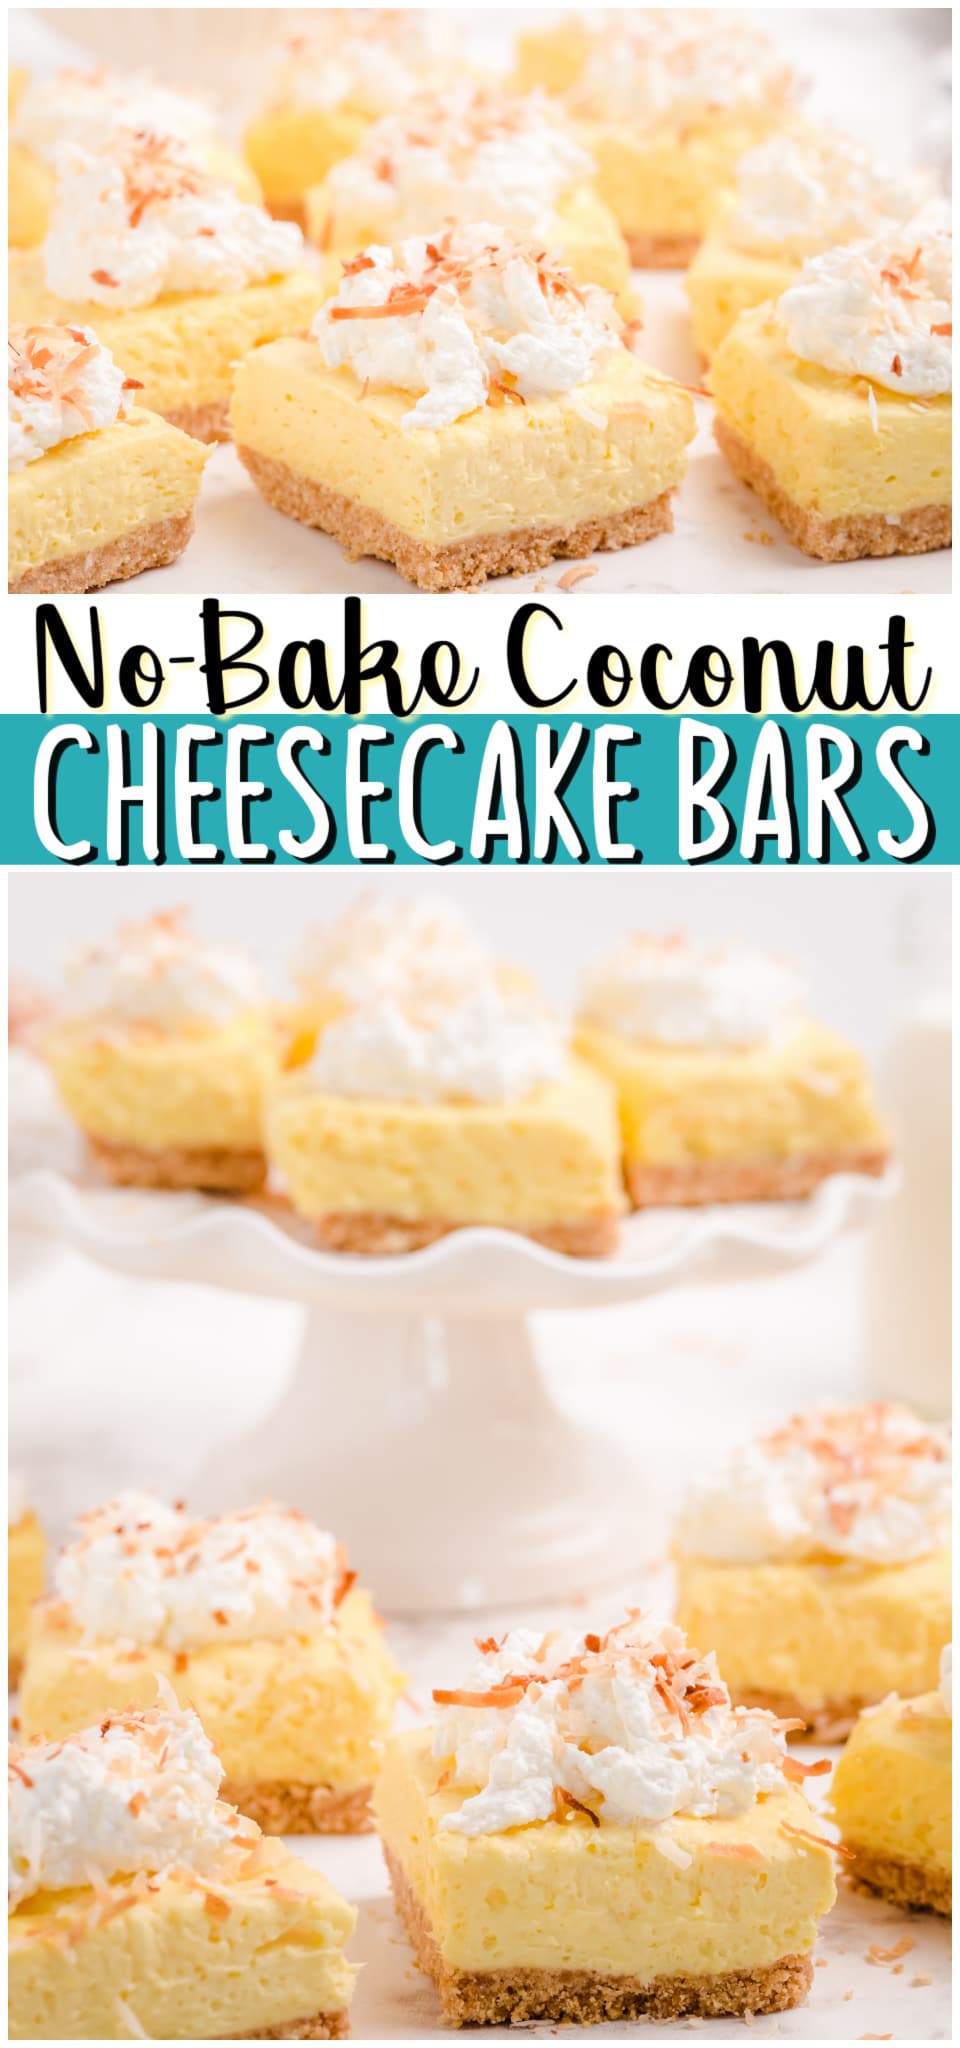 Easy No-Bake Coconut Cheesecake Bars made with just 6 ingredients and so delicious! Coconut Pudding mix, cream cheese and whipped cream unite in this simple no-bake cheesecake recipe.